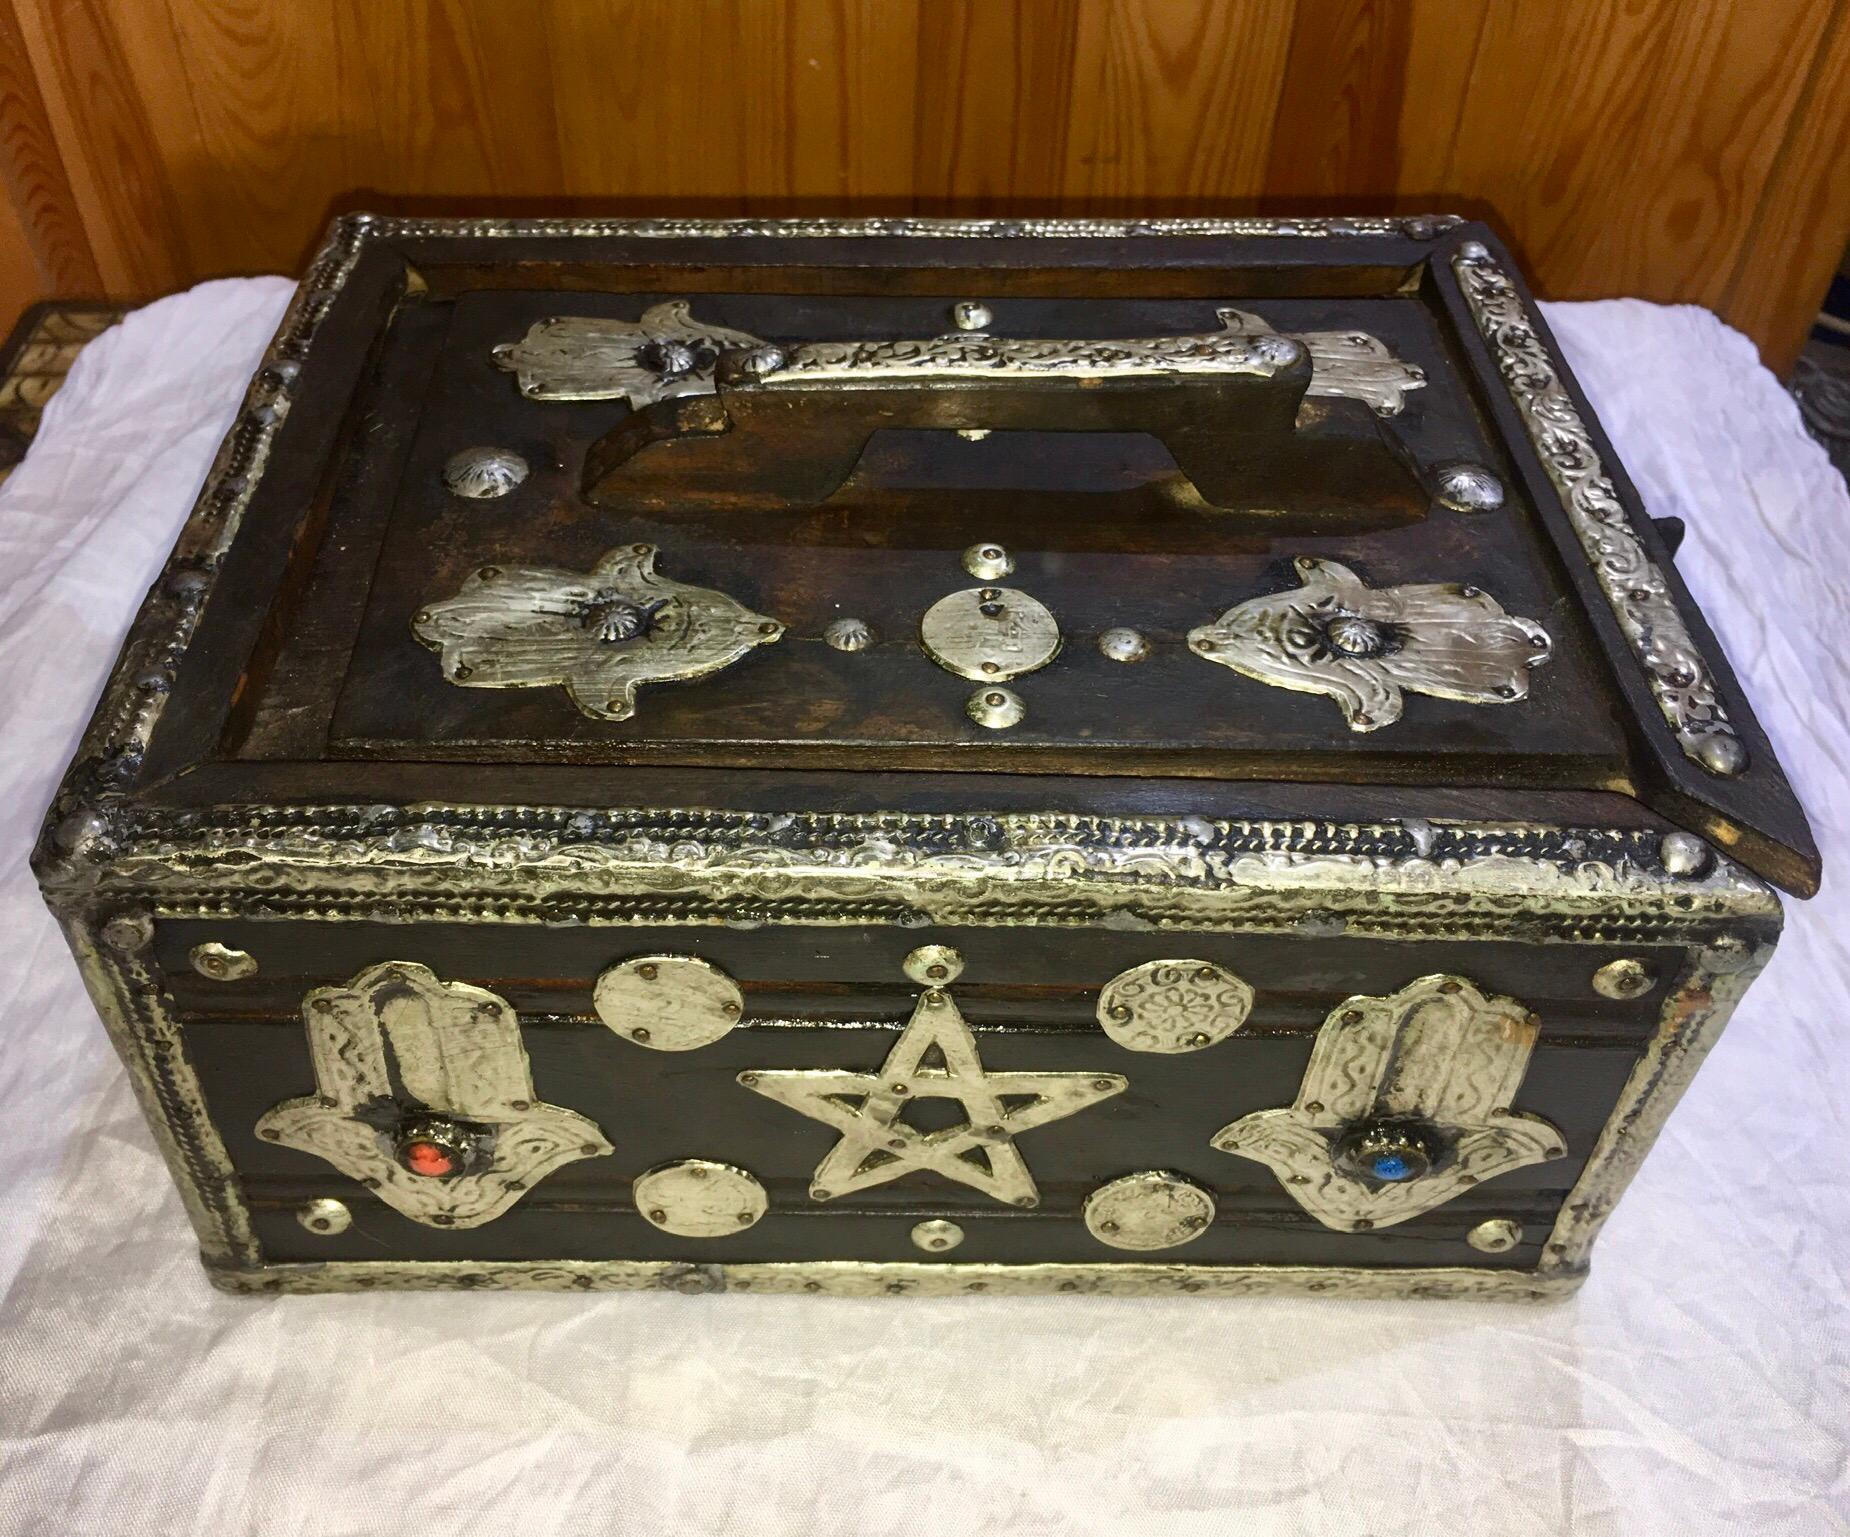 This eye-catching ebony tamarix storage box was once used to store and transport eggs. Made in southern Morocco, the wood is sturdy ebony-colored tamarix with silver and brass repousse, vintage coins, camel bone, and gemstone adornments. 

The front